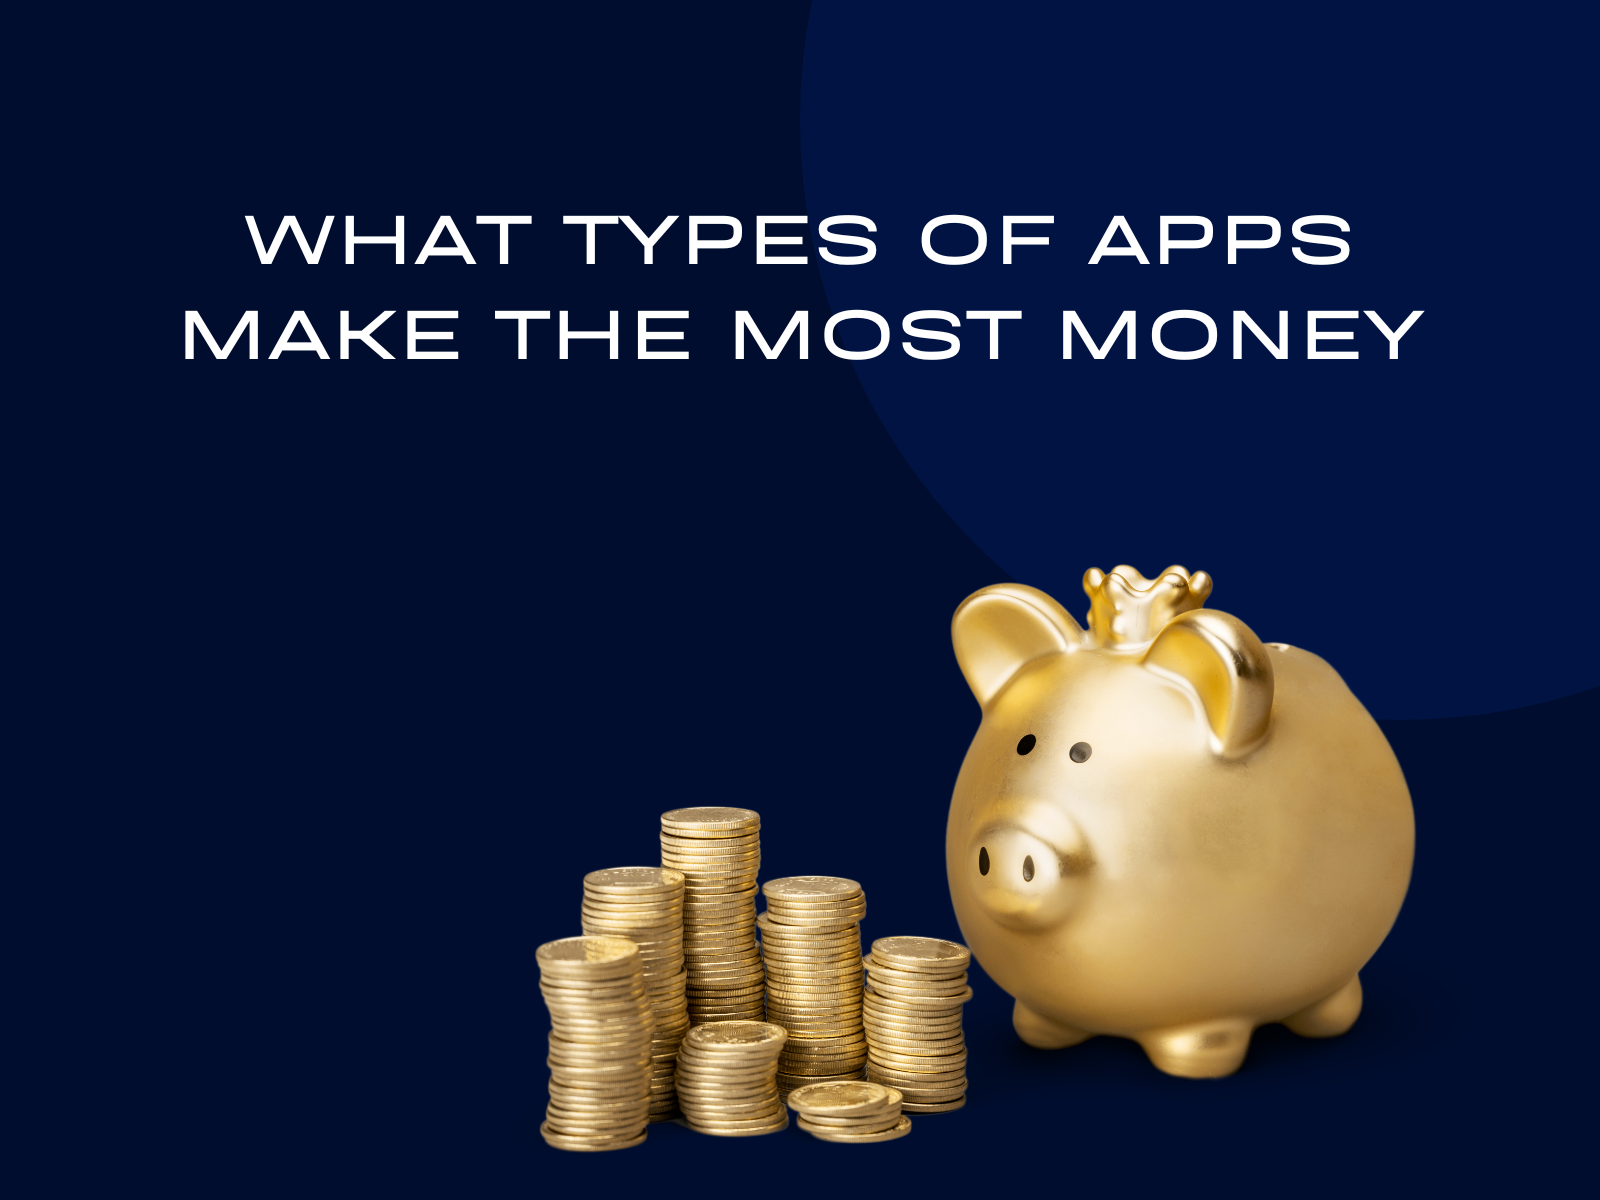 What Types of Apps Make the Most Money